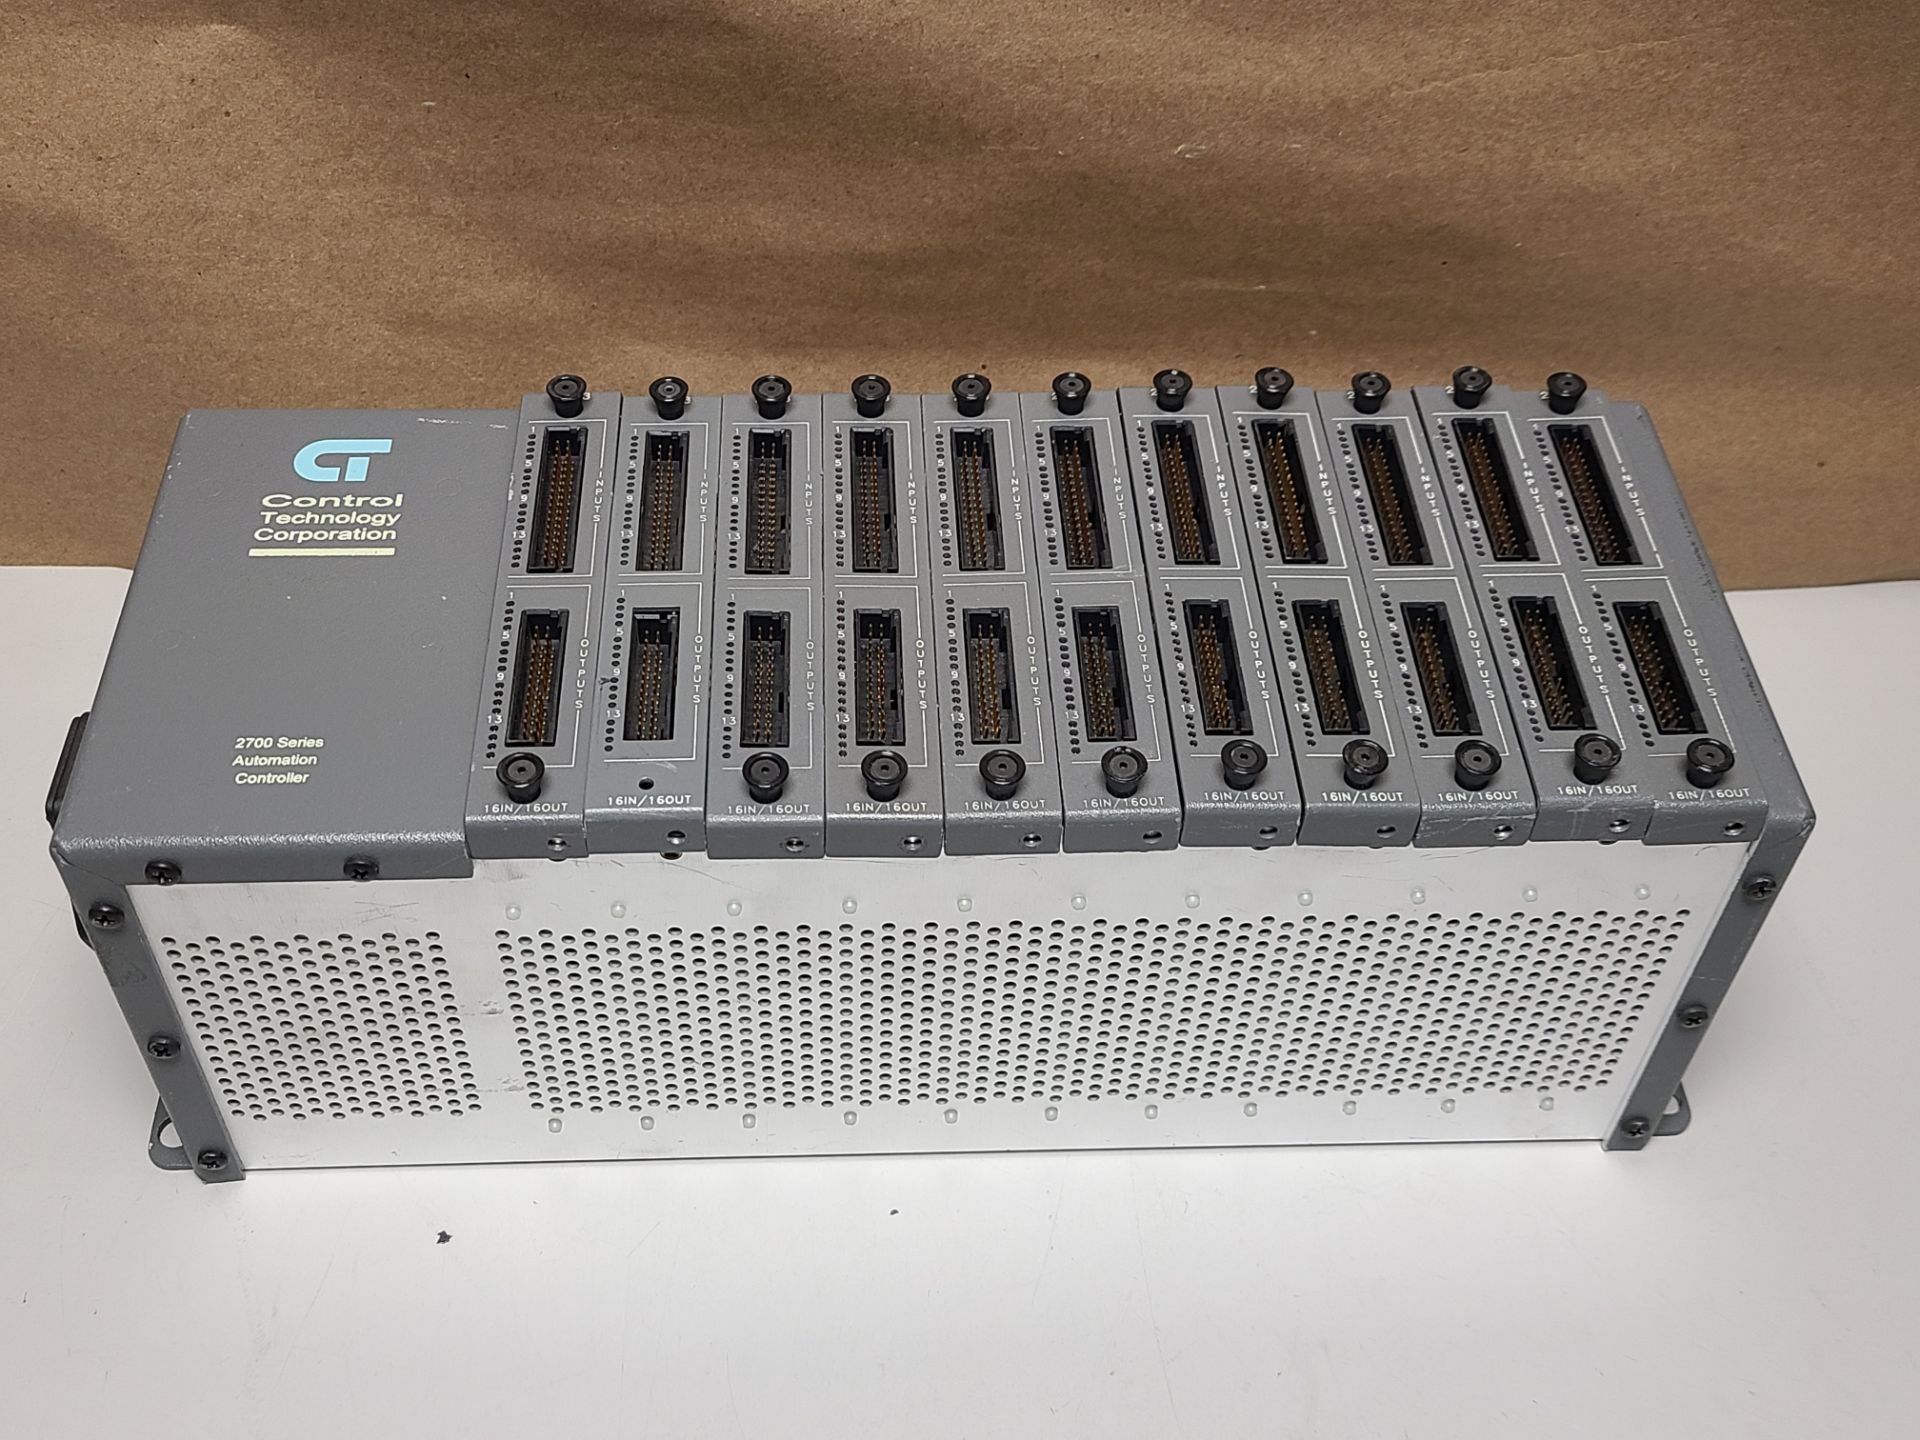 CONTROL TECHNOLOGY PLC RACK WITH MODULES